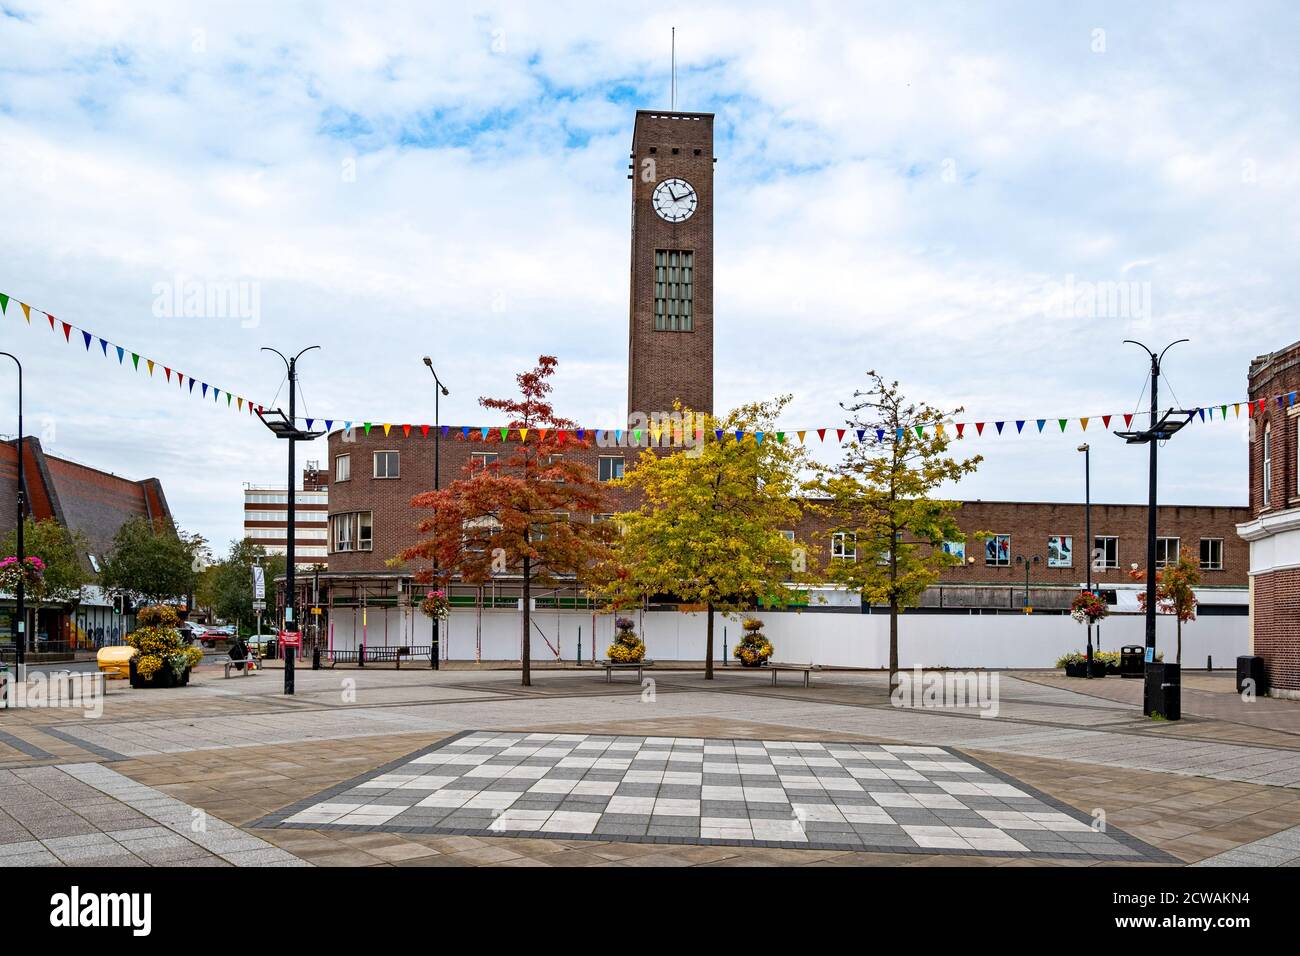 Town centre with clock tower and former war memorial location in Crewe Cheshire UK Stock Photo